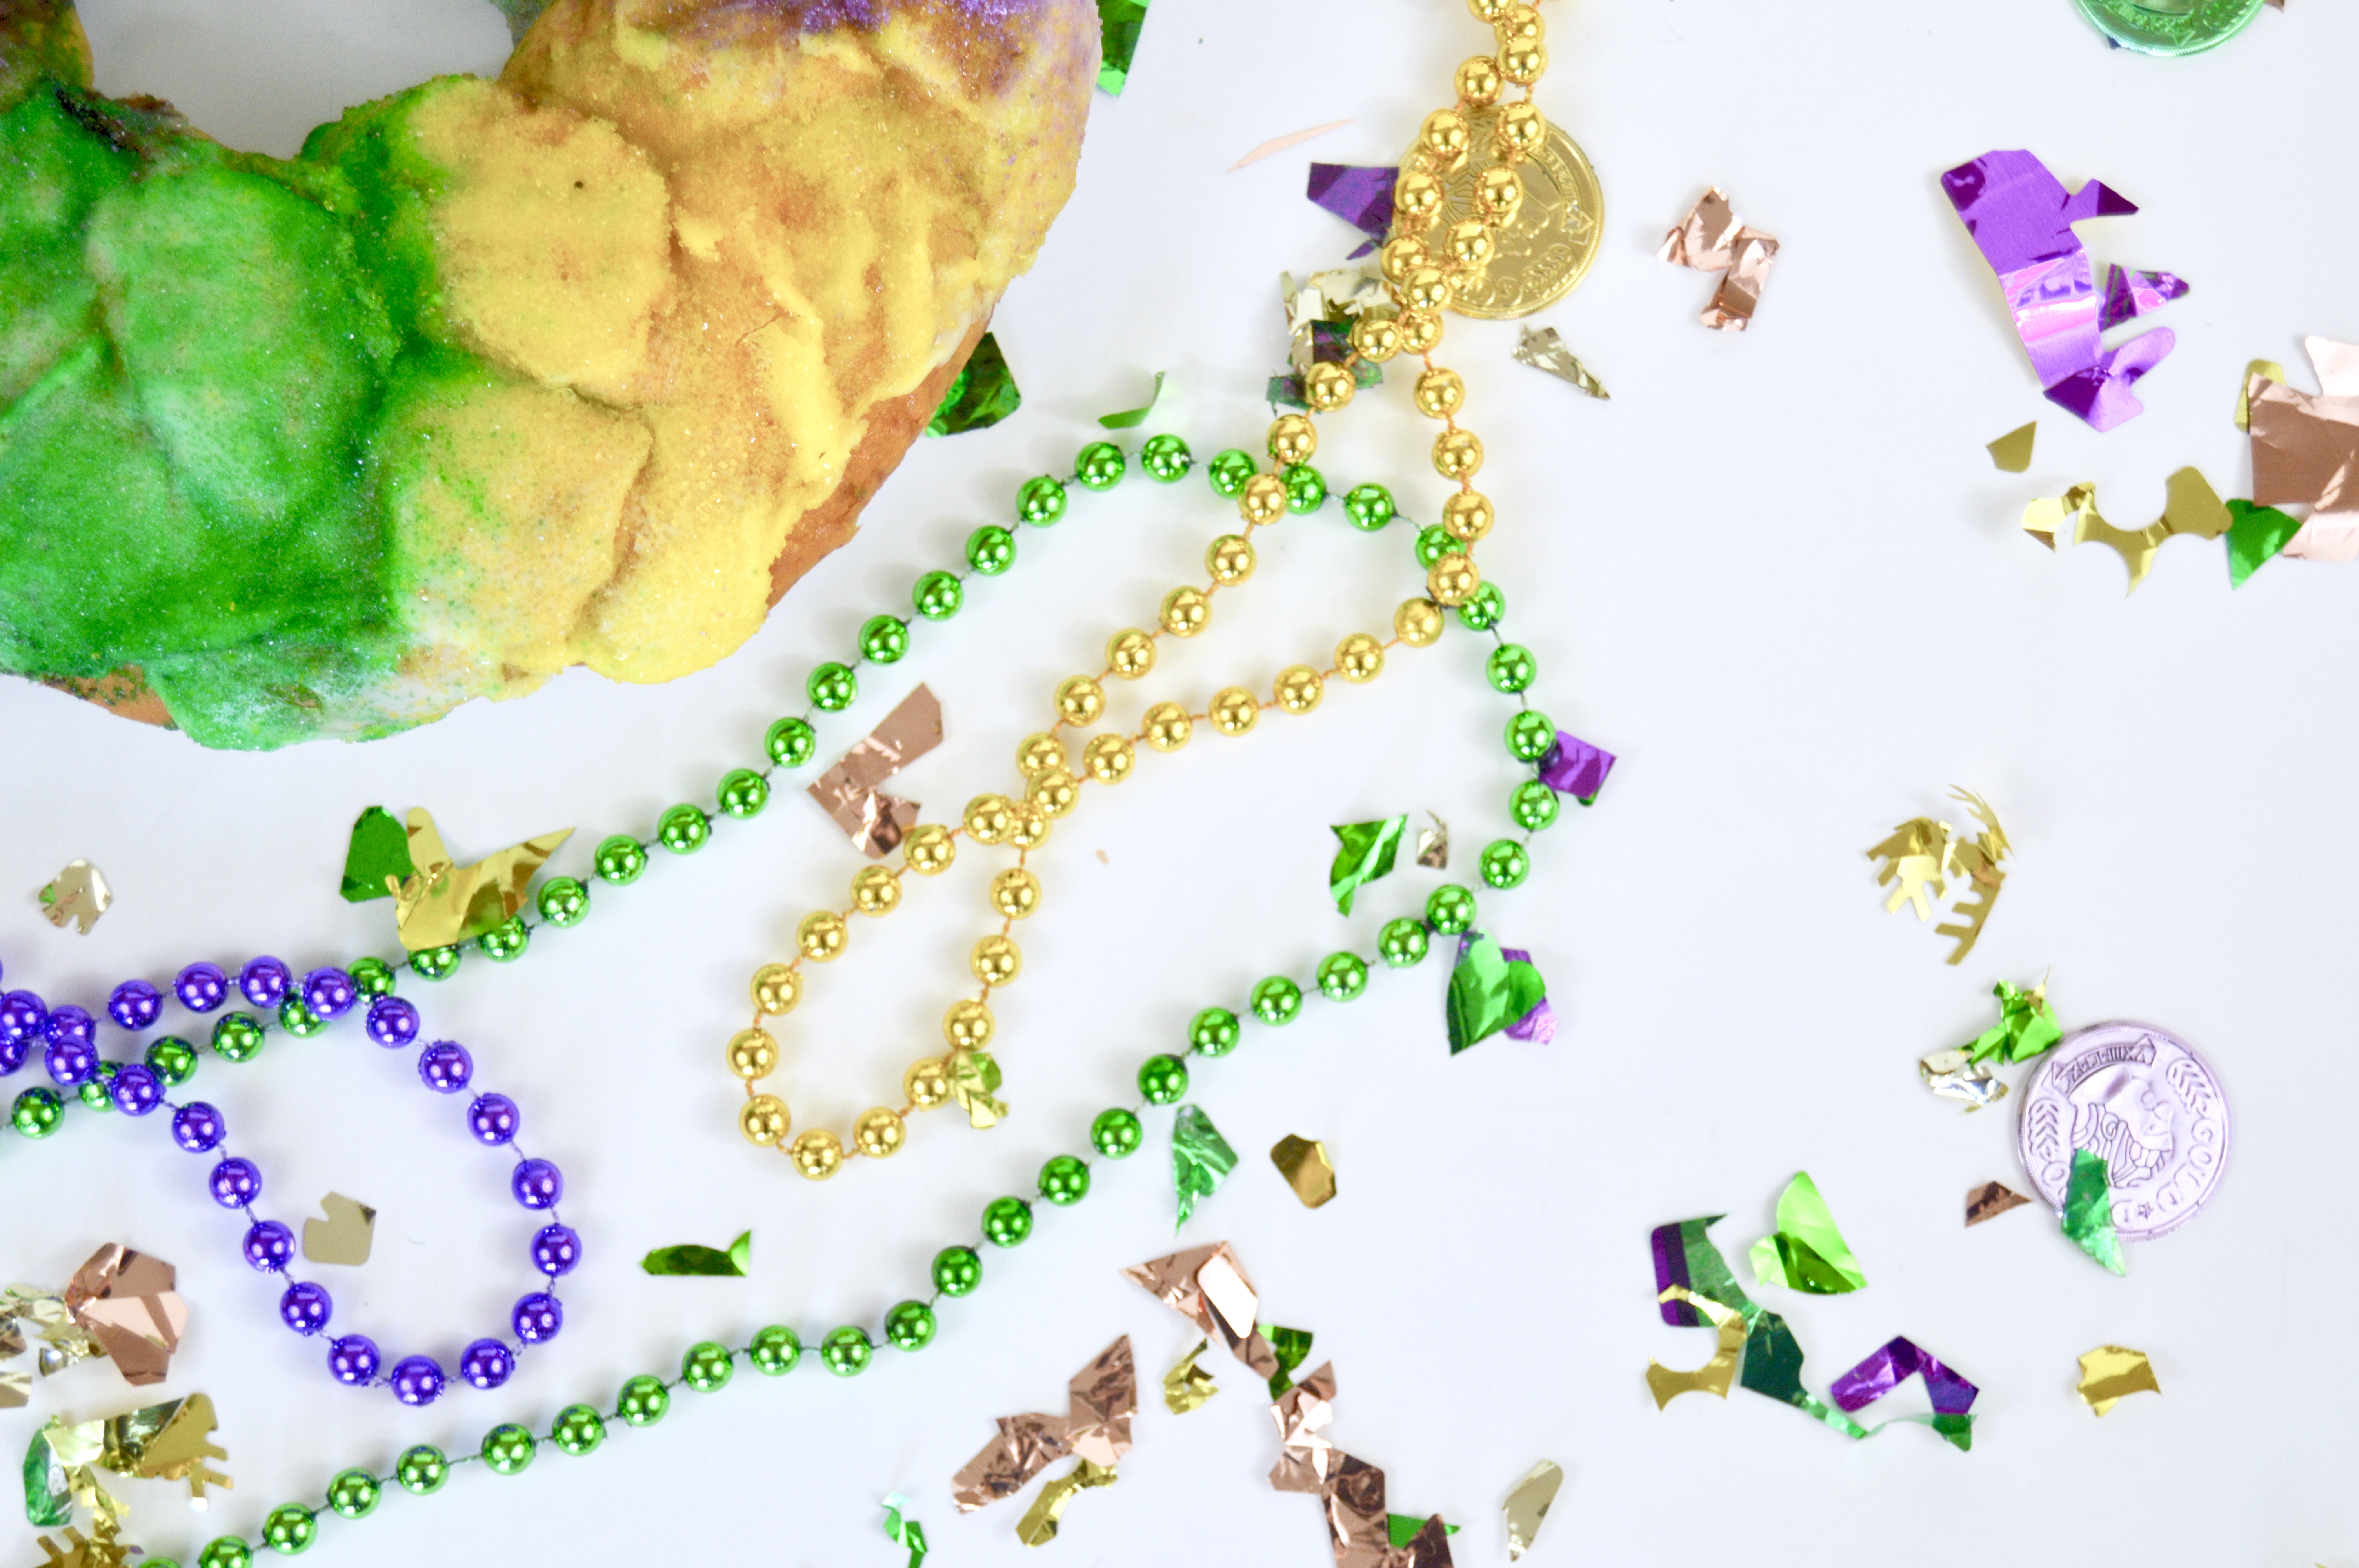 Looking for a king cake this Mardi Gras season? Look no further! Check out the ULTIMATE list of where to find the best king cakes here in Baton Rouge and the surrounding area. From traditional to crazy, you'll find it all here!